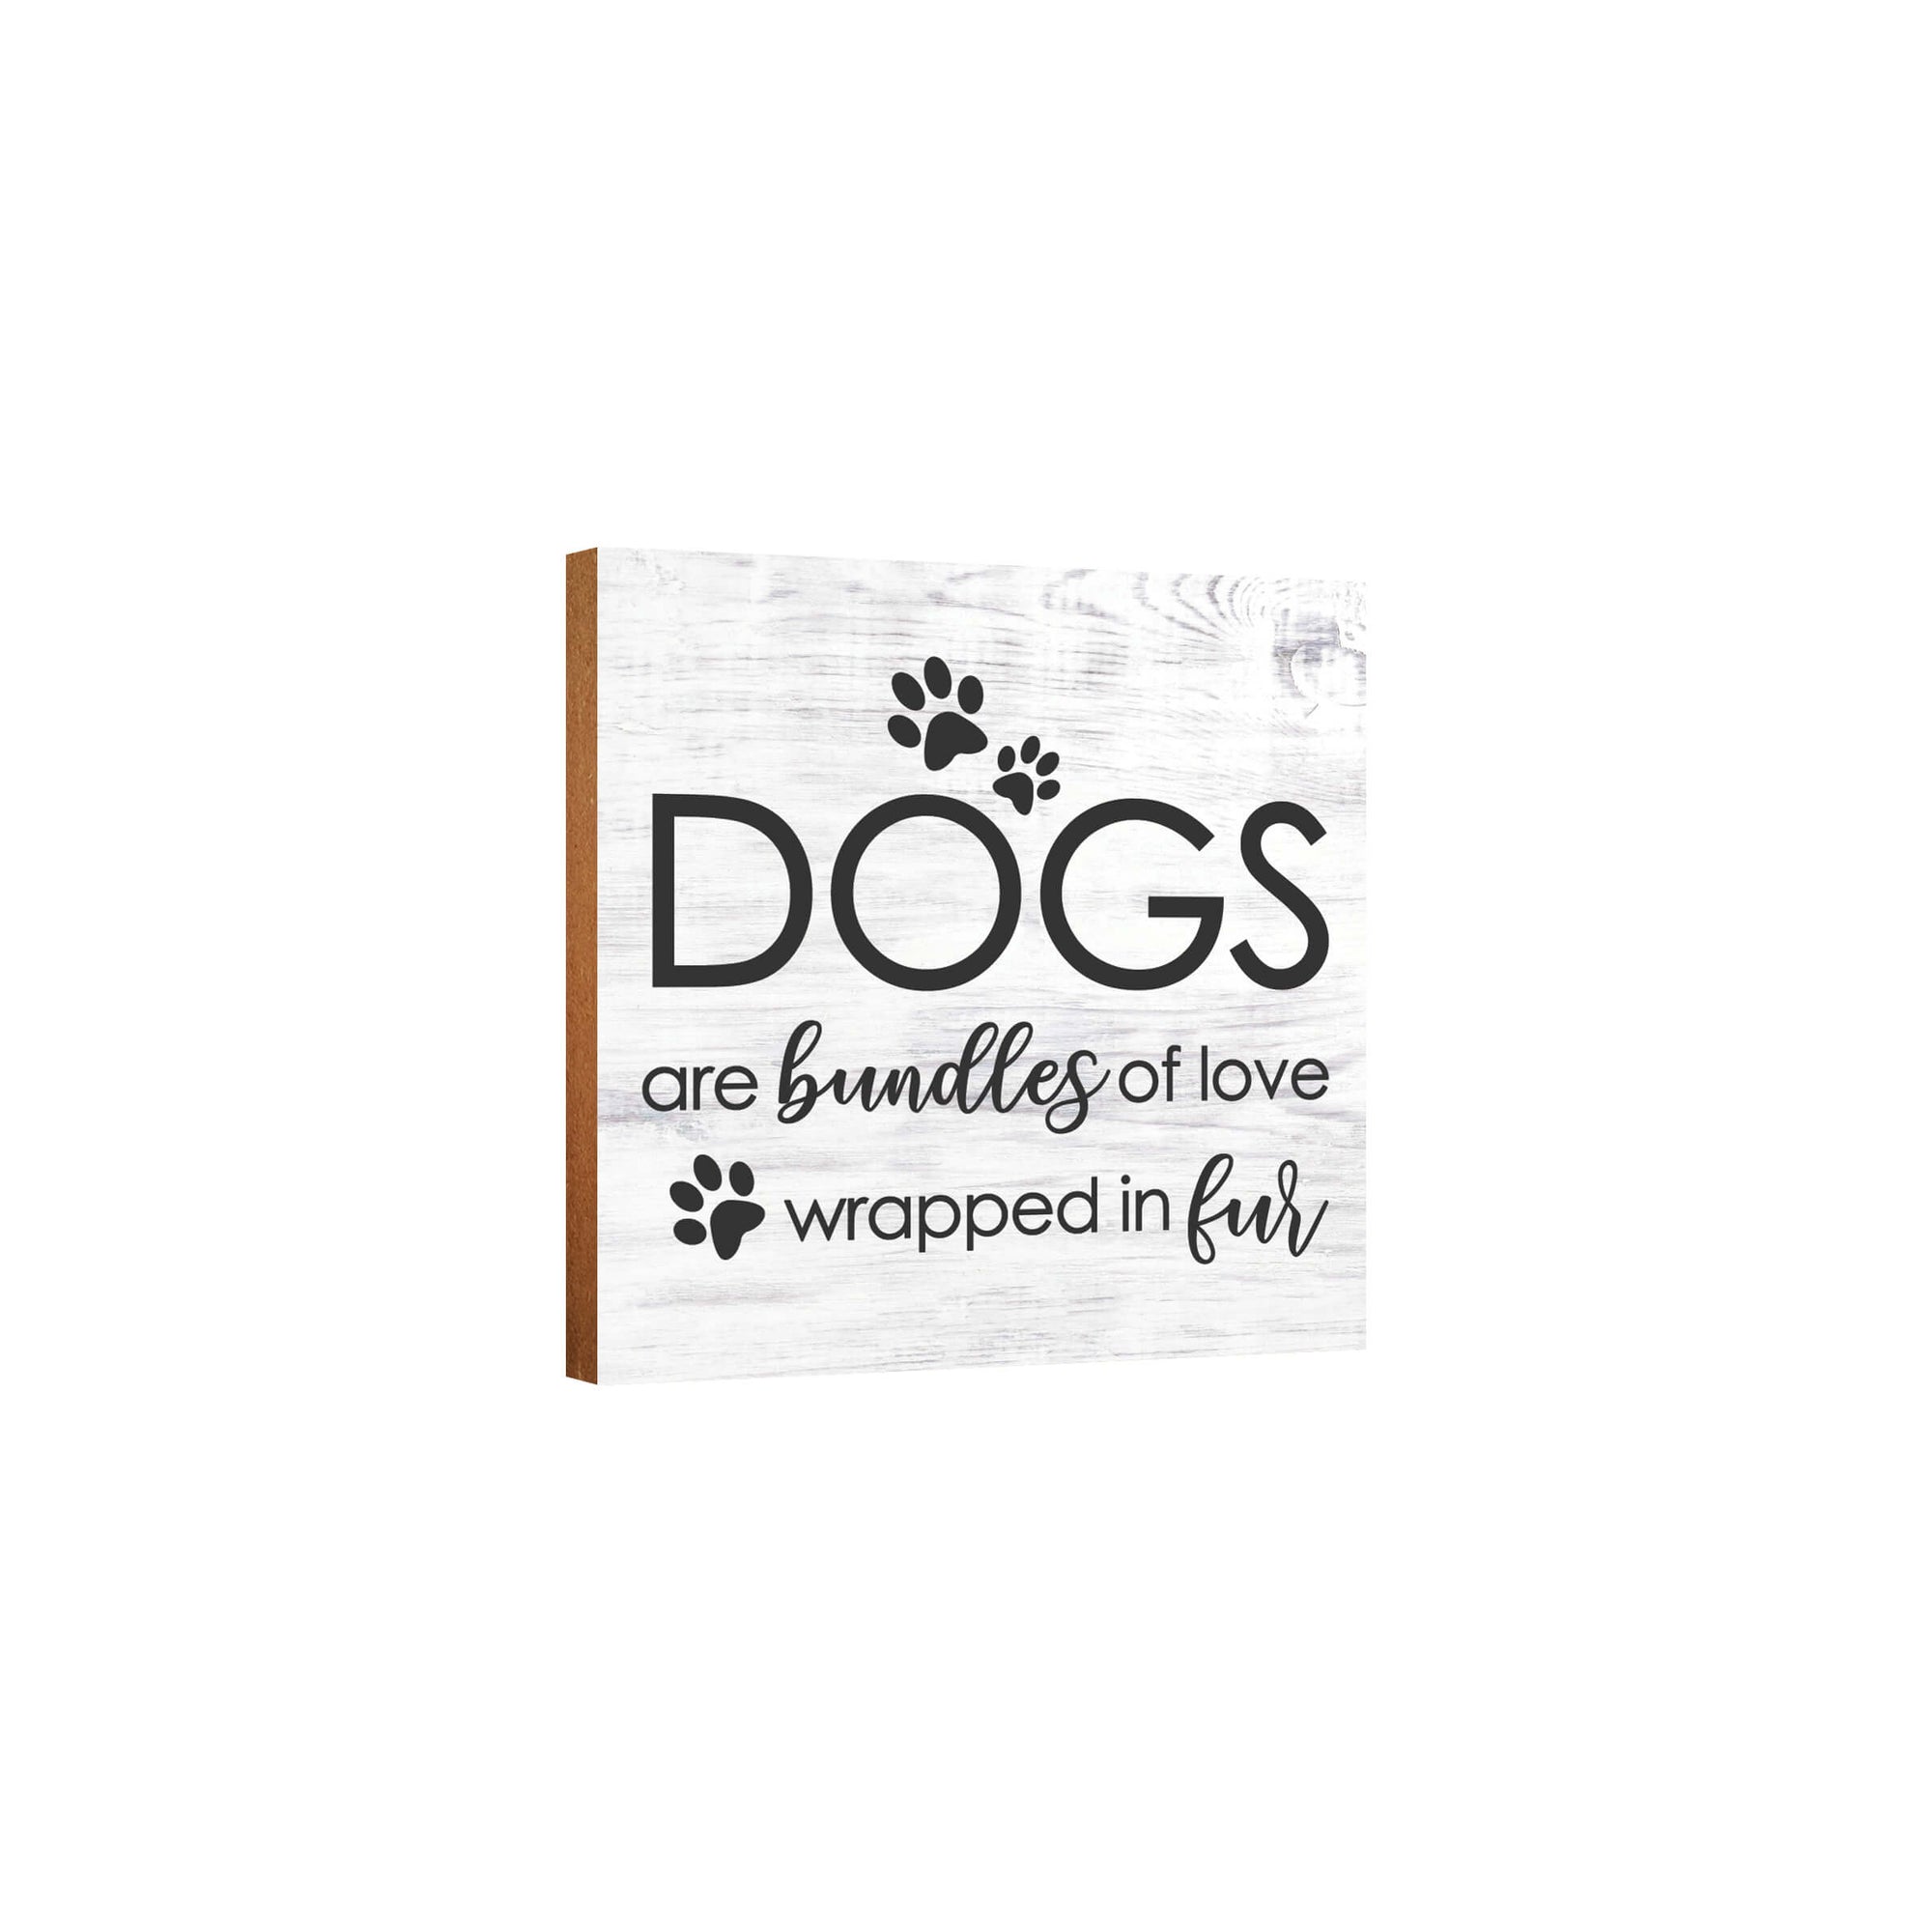 Wooden Shelf Decor and Tabletop Signs with Pet Verses - Bundles of Love